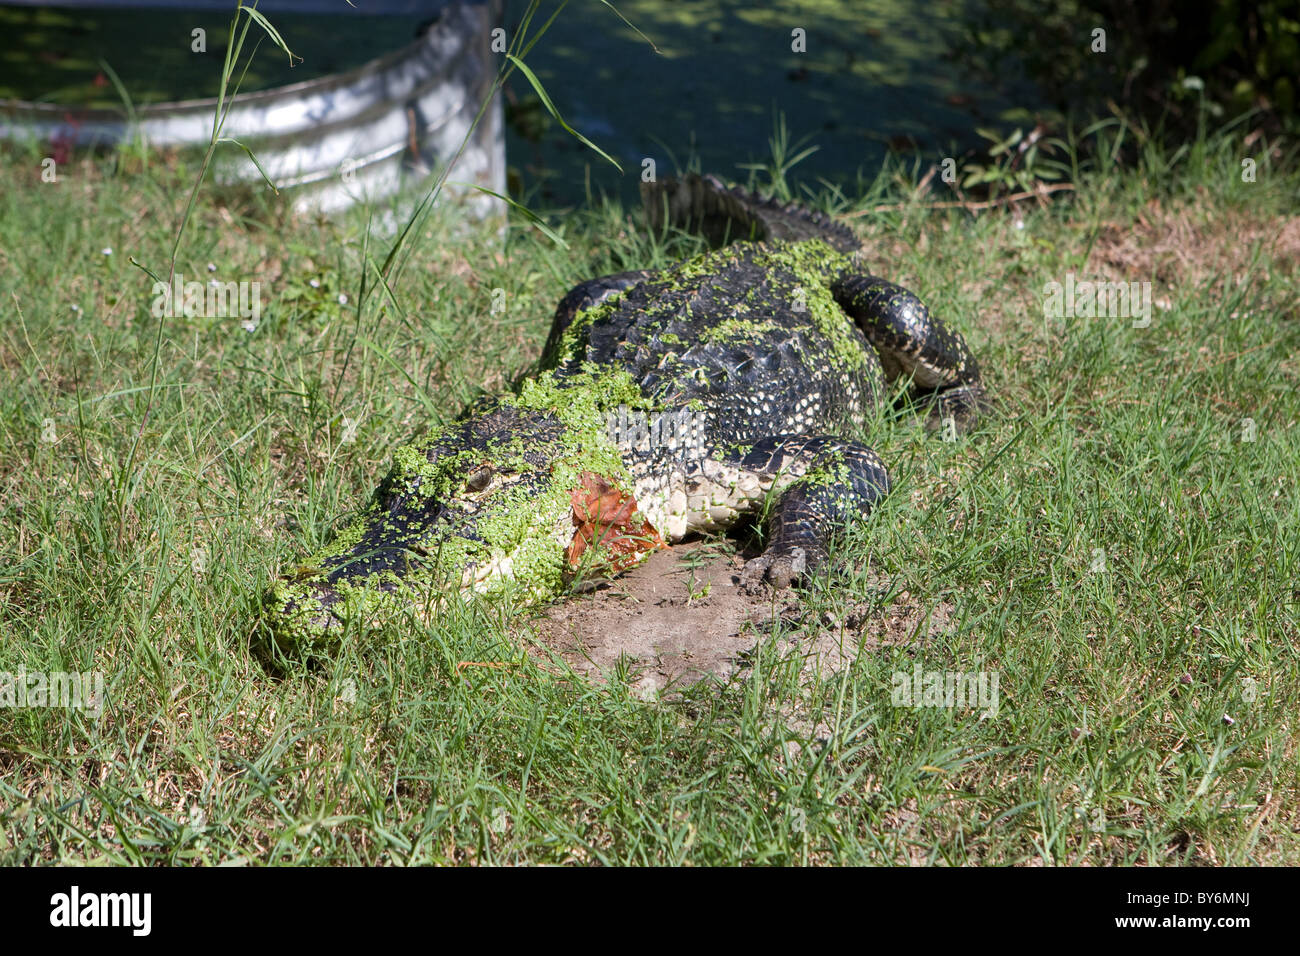 Florida alligator suns itself on the grassy banks of the marsh in St. Marks National Wildlife Refuge, Florida. It is covered in Stock Photo